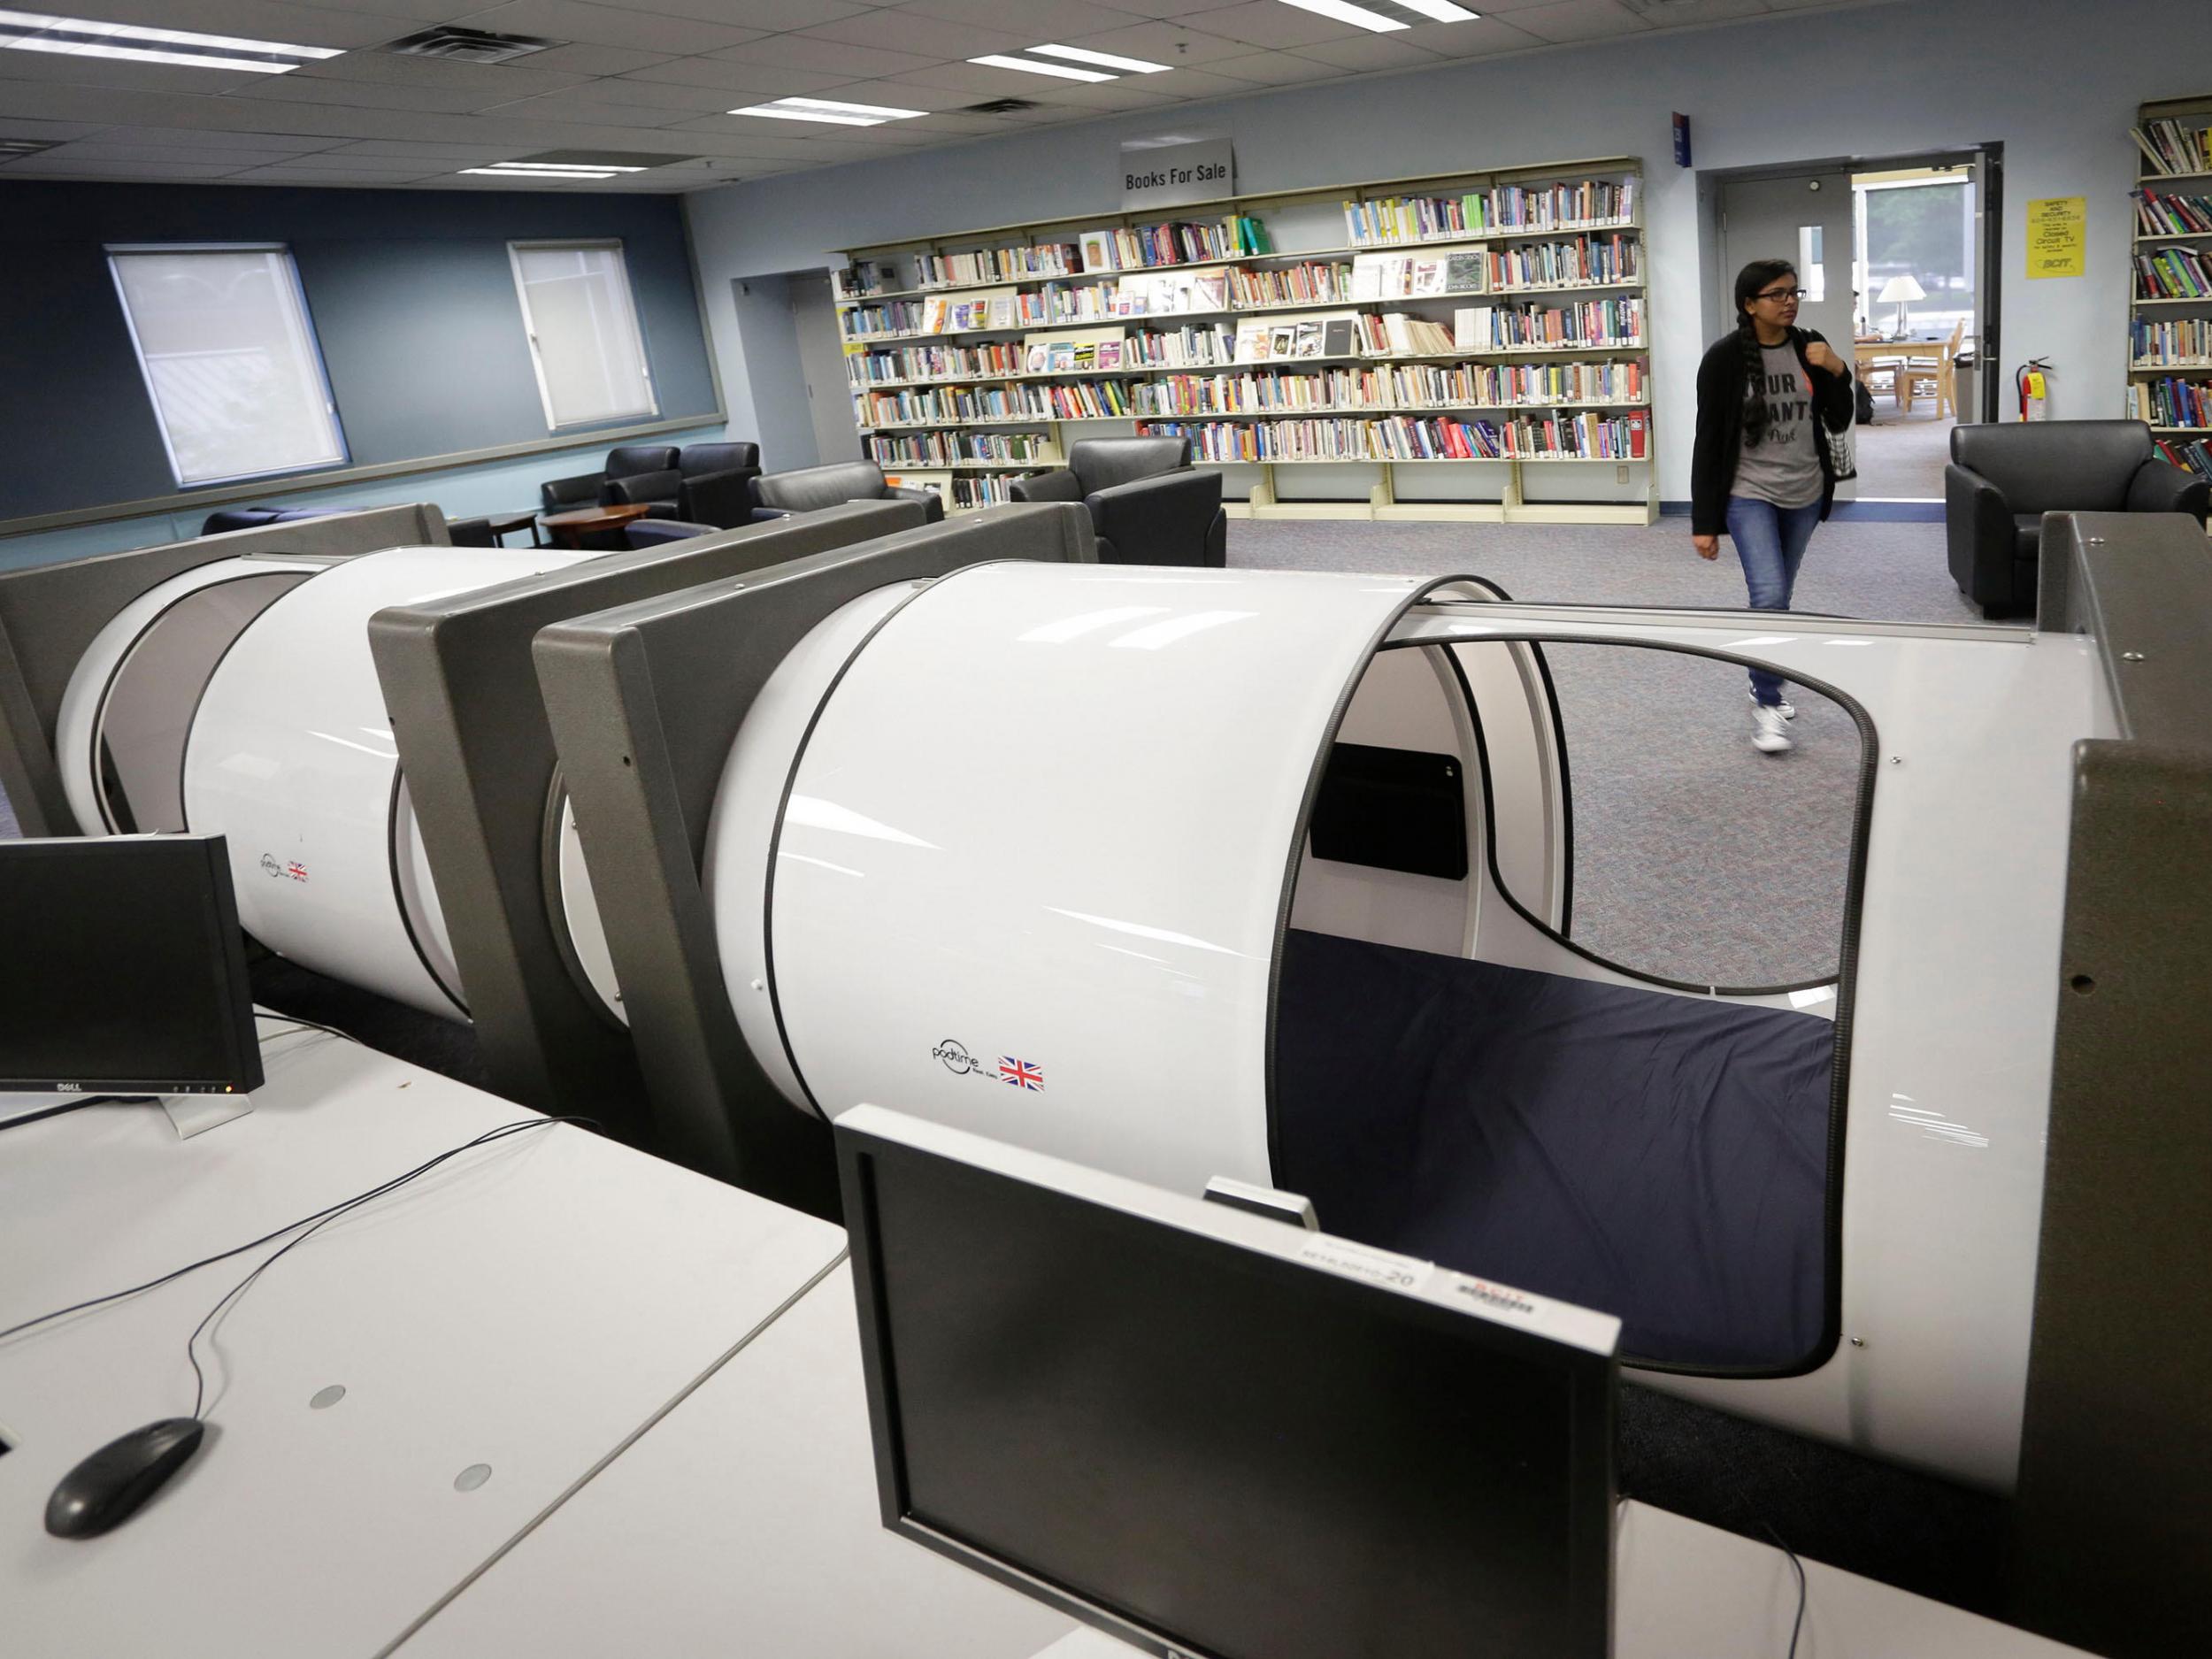 Two sleep pods inside the campus library of the British Columbia Institute of Technology (BCIT) in Vancouver, Canada